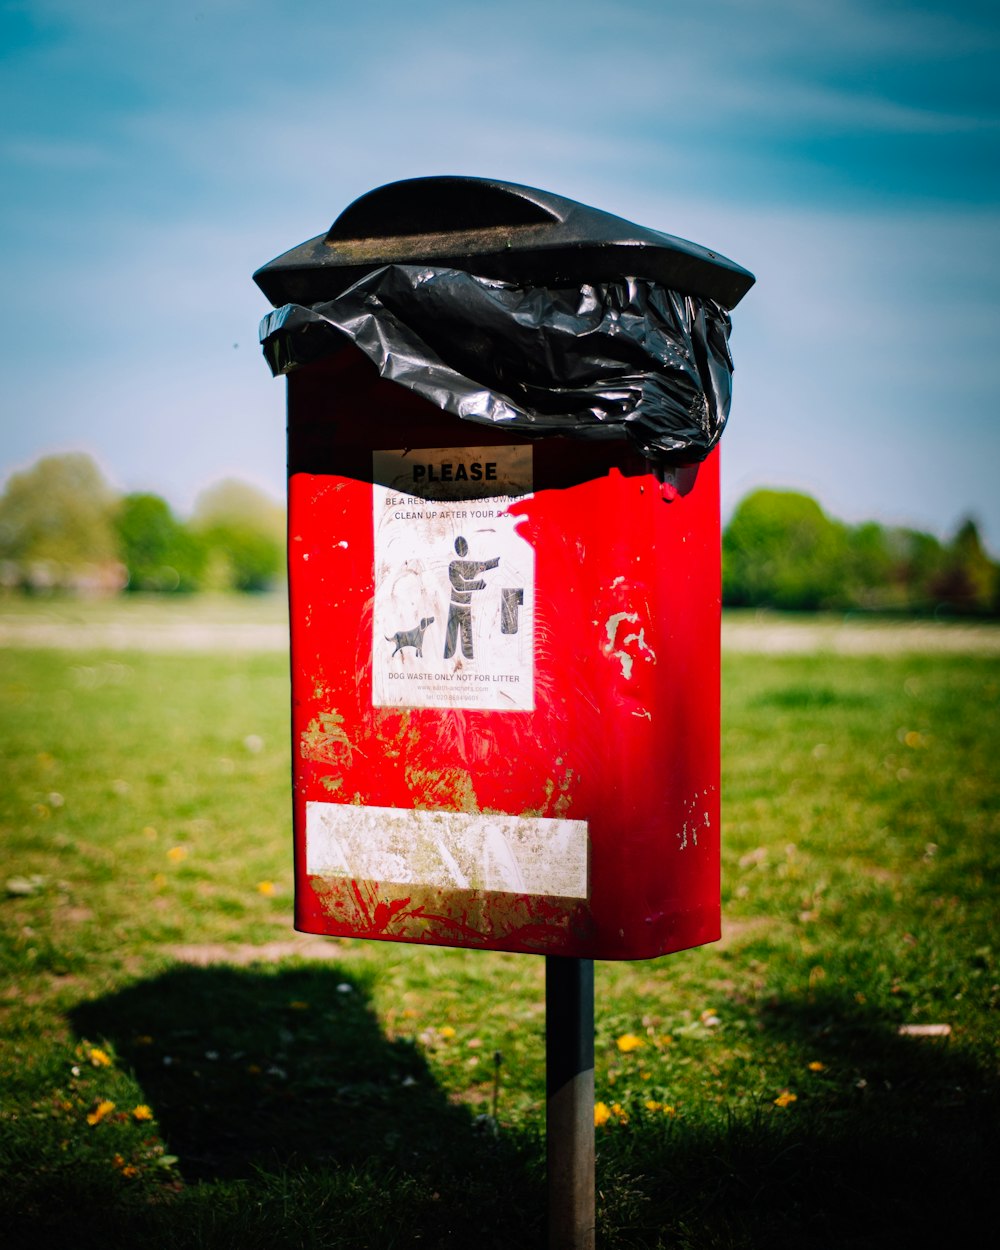 red and black trash bin on green grass field during daytime